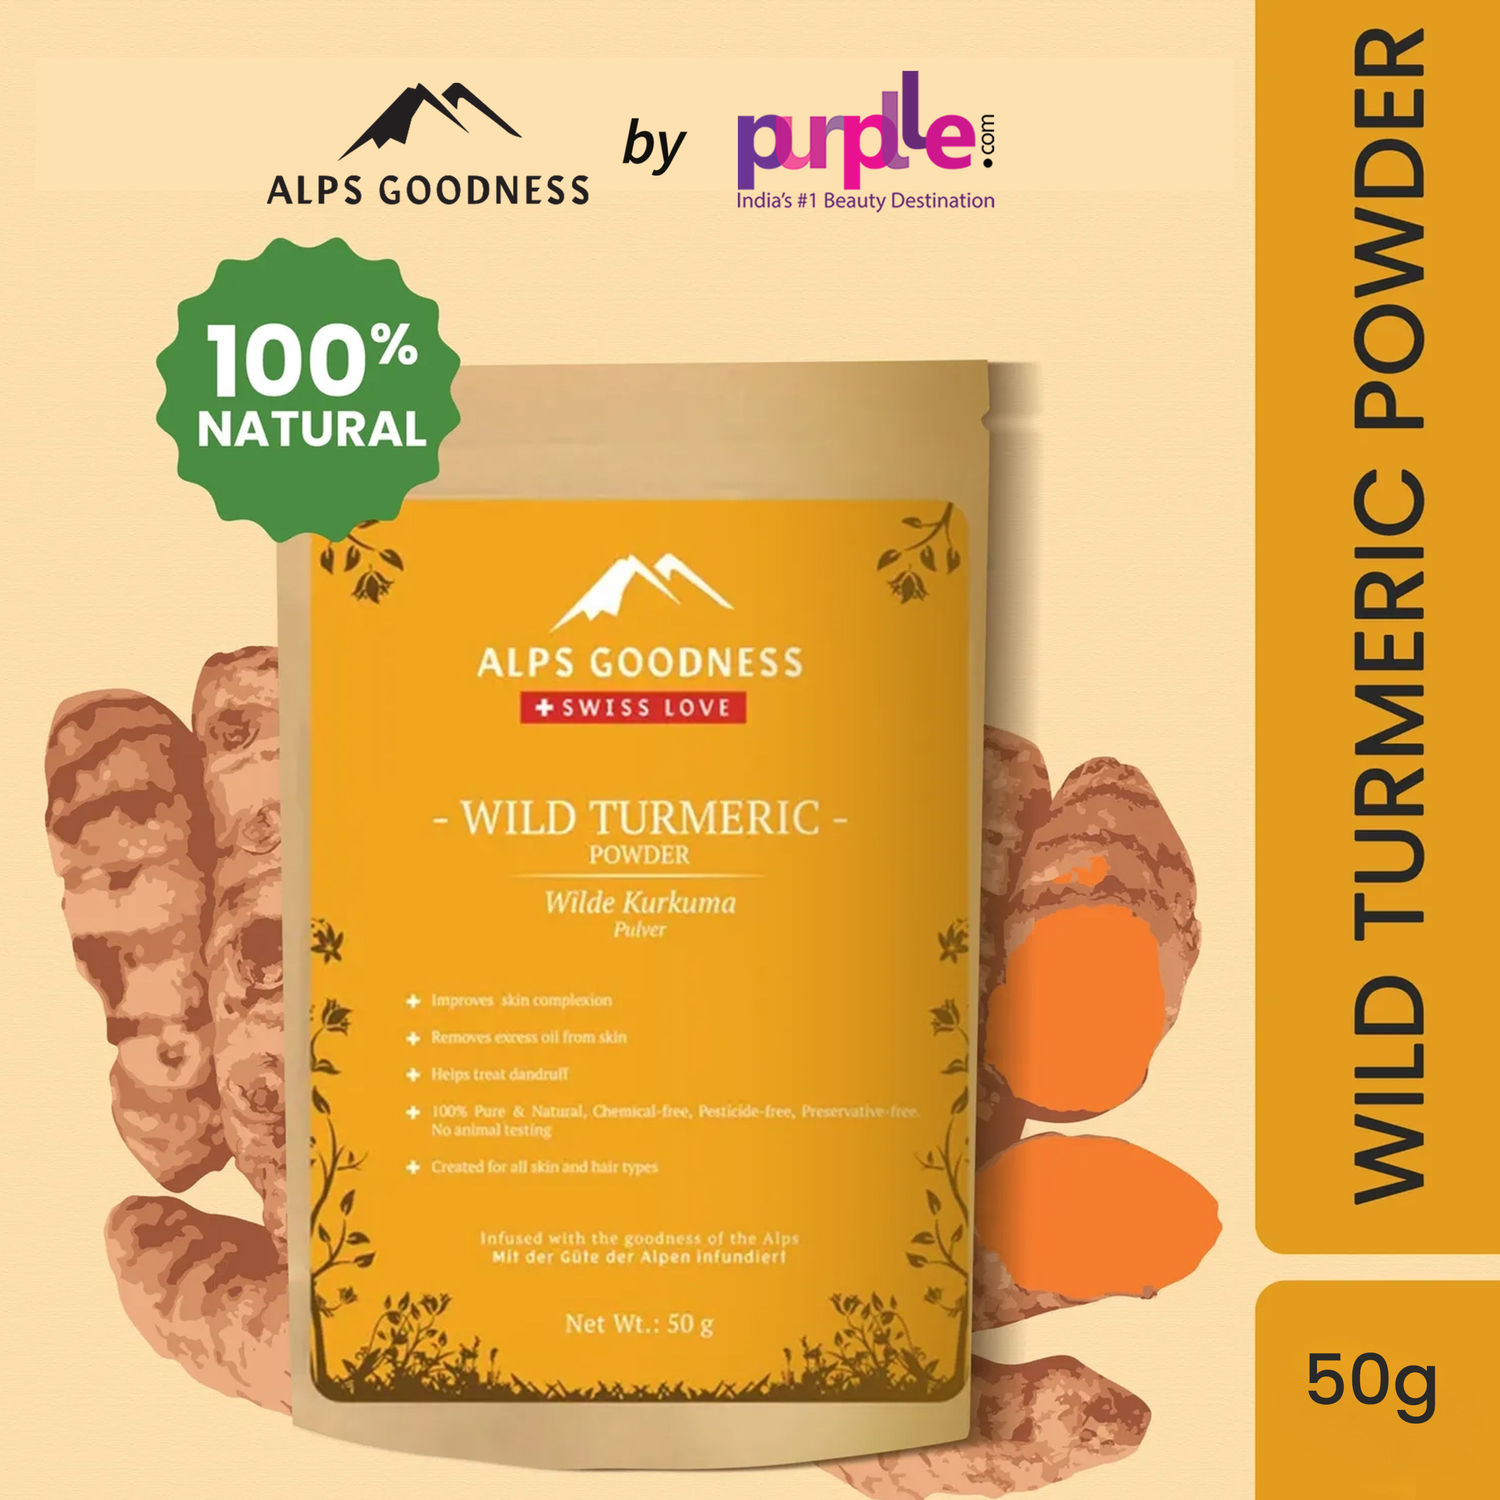 Alps Goodness Powder - Wild Turmeric (50 gm)| Kasturi Haldi Powder| Wild Turmeric powder| 100% Natural Powder | No Chemicals, No Preservatives, No Pesticides | Face Mask for Even Toned Skin | Face Mask for Glow	